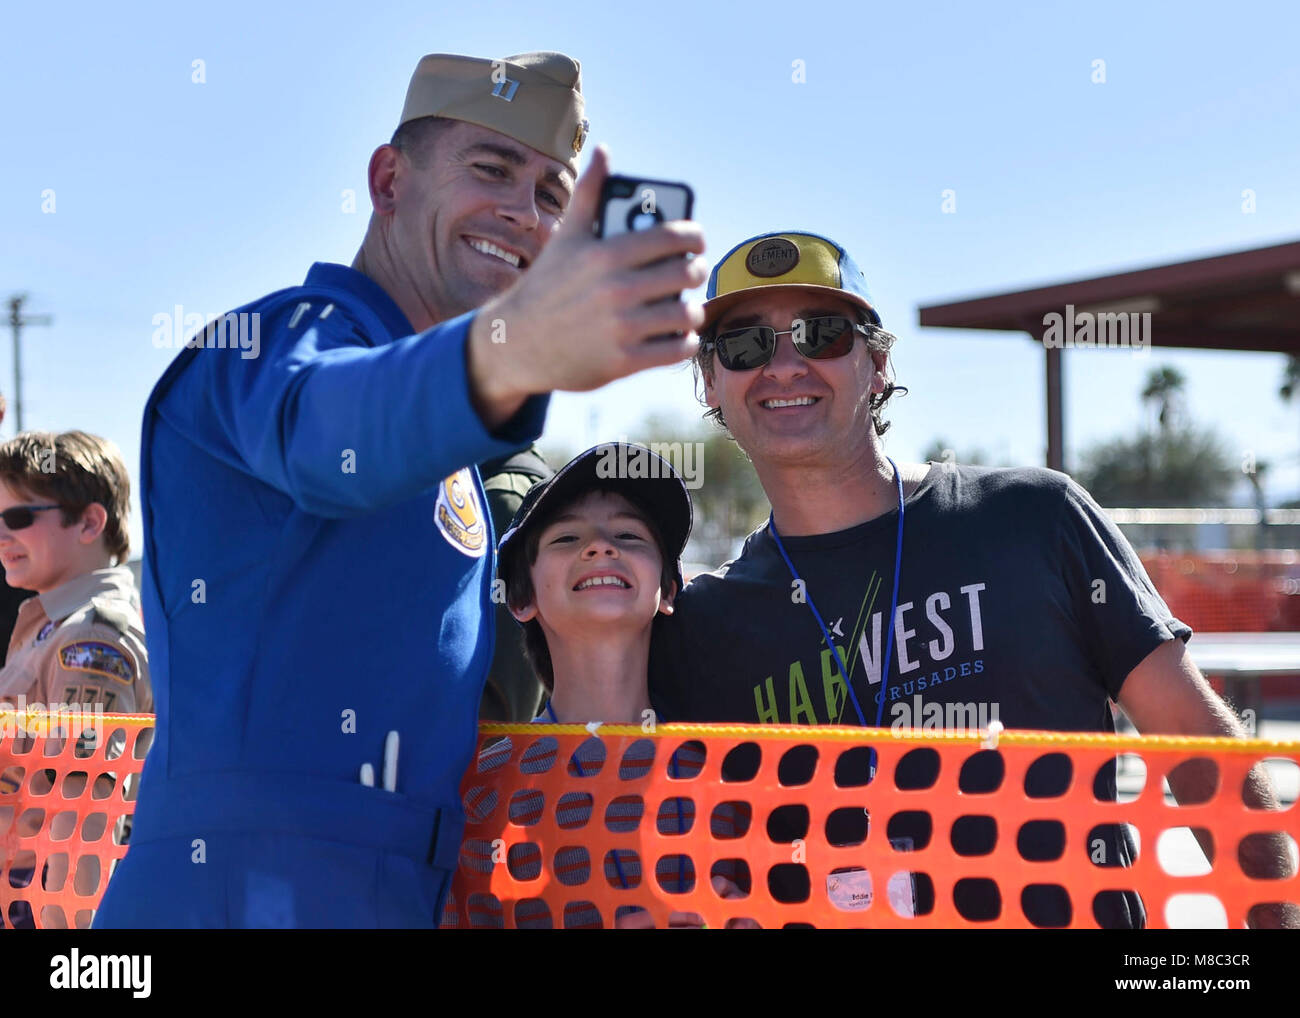 EL CENTRO, Calif. (Feb. 24, 2018) Blue Angels Right Wing Pilot, Lt. Damon Kroes, takes a selfie with fans following a practice demonstration. The Blue Angels are scheduled to perform more than 60 demonstrations at more than 30 locations across the U.S. in 2018. (U.S. Navy Stock Photo